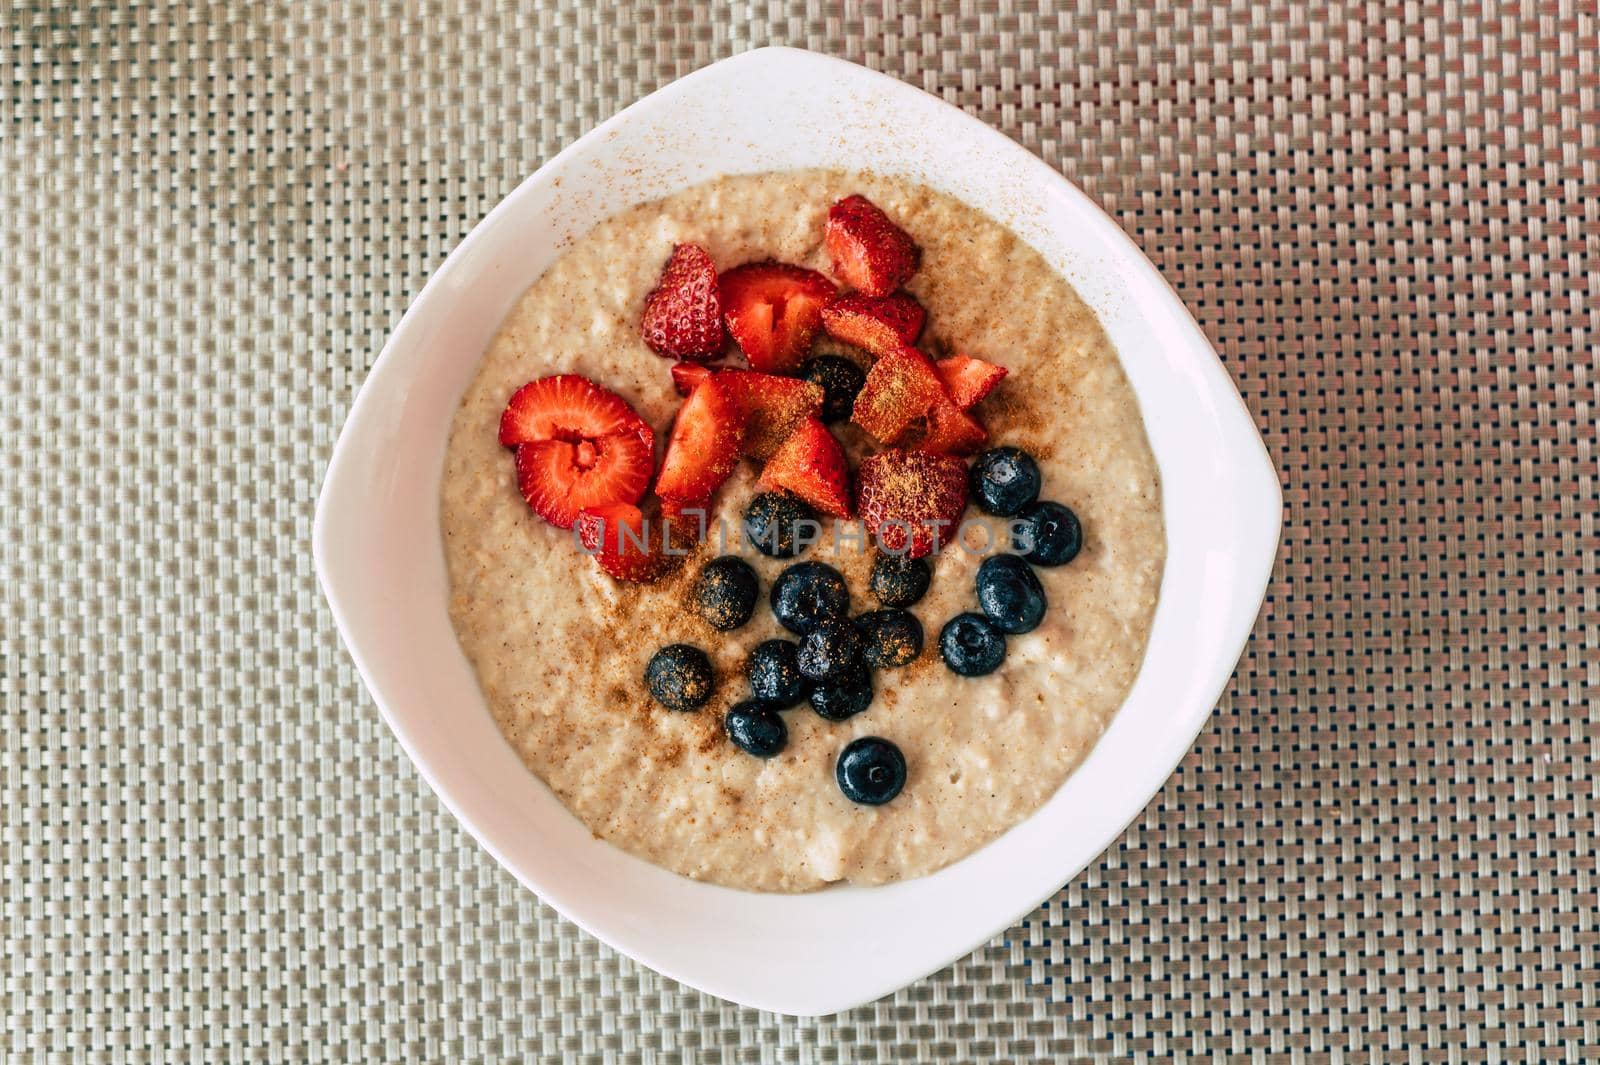 Homemade oatmeal with blueberries and strawberries in a bowl. Healthy breakfast. Top view. by Peruphotoart